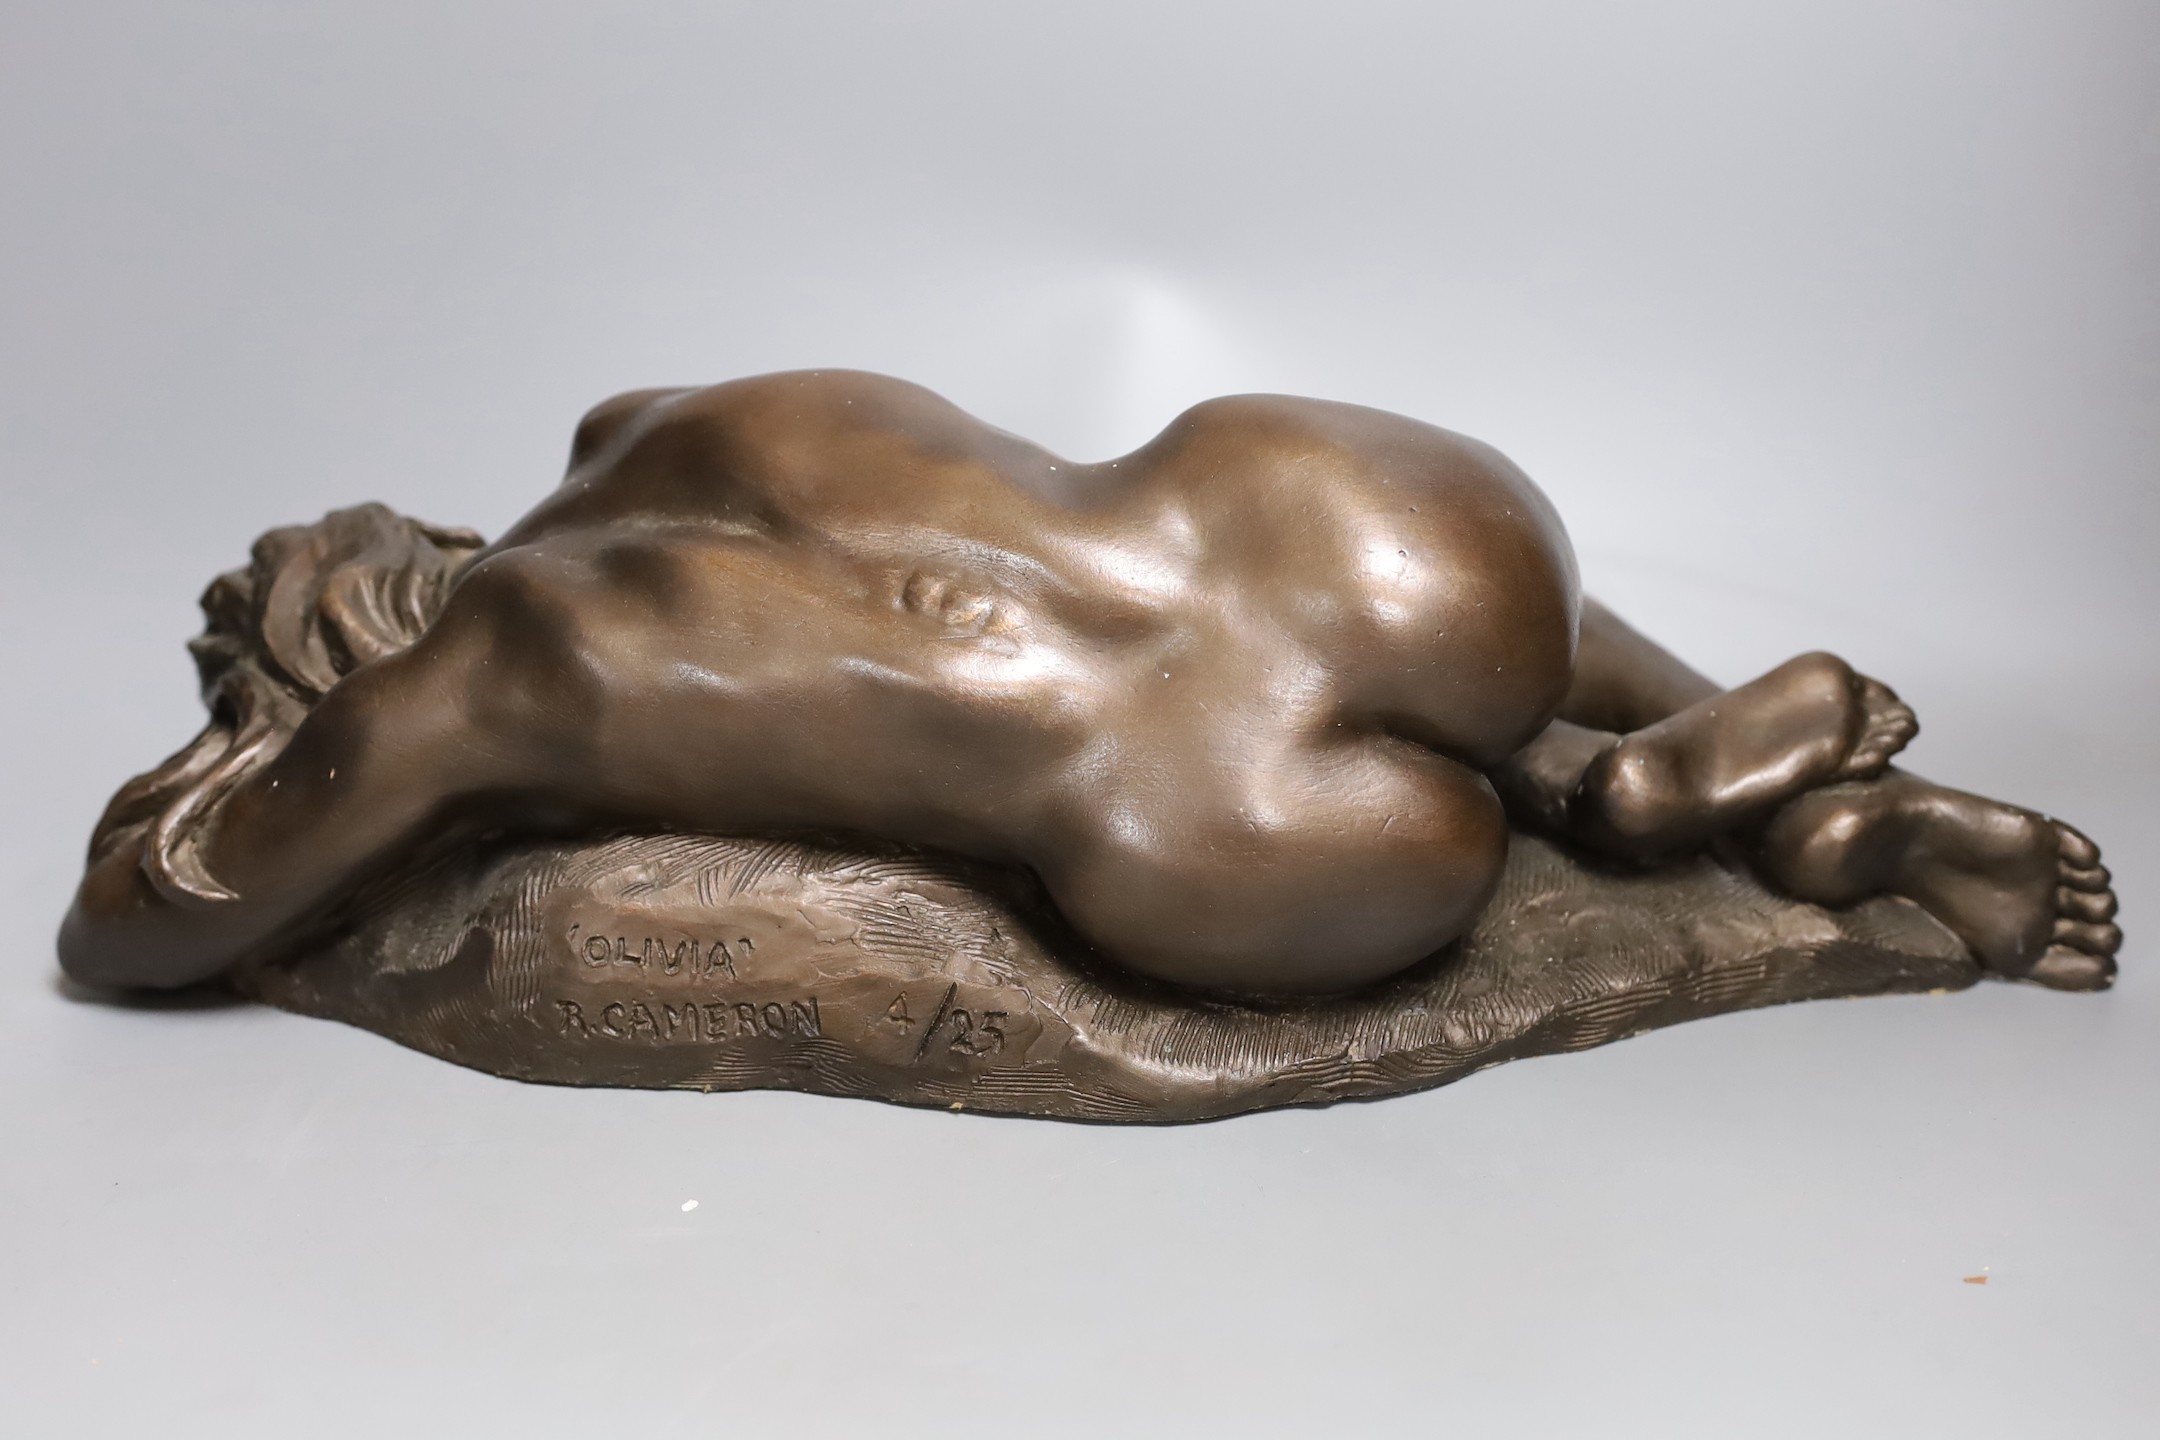 Ronald Cameron (b.1930), simulate bronze, 'Olivia', numbered 4/25 (a.f.) - 46cm long - Image 3 of 3